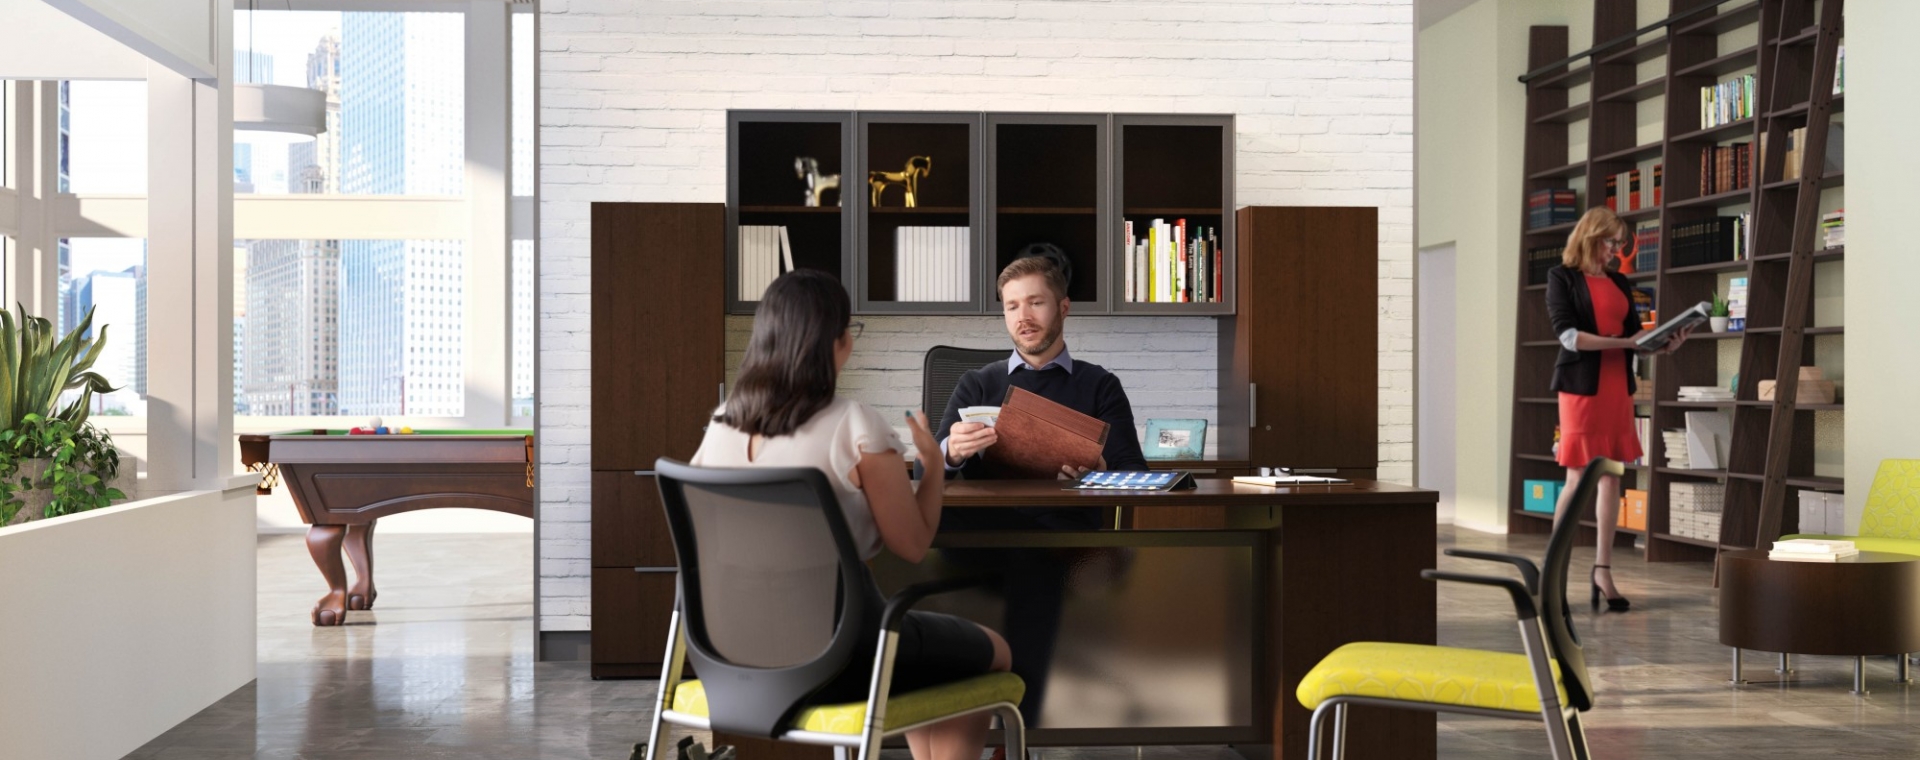 open air office space with a man and woman discussing work at his desk. Yellow stationary high back chairs. Dark wood wall height bookshelves line the walls. 